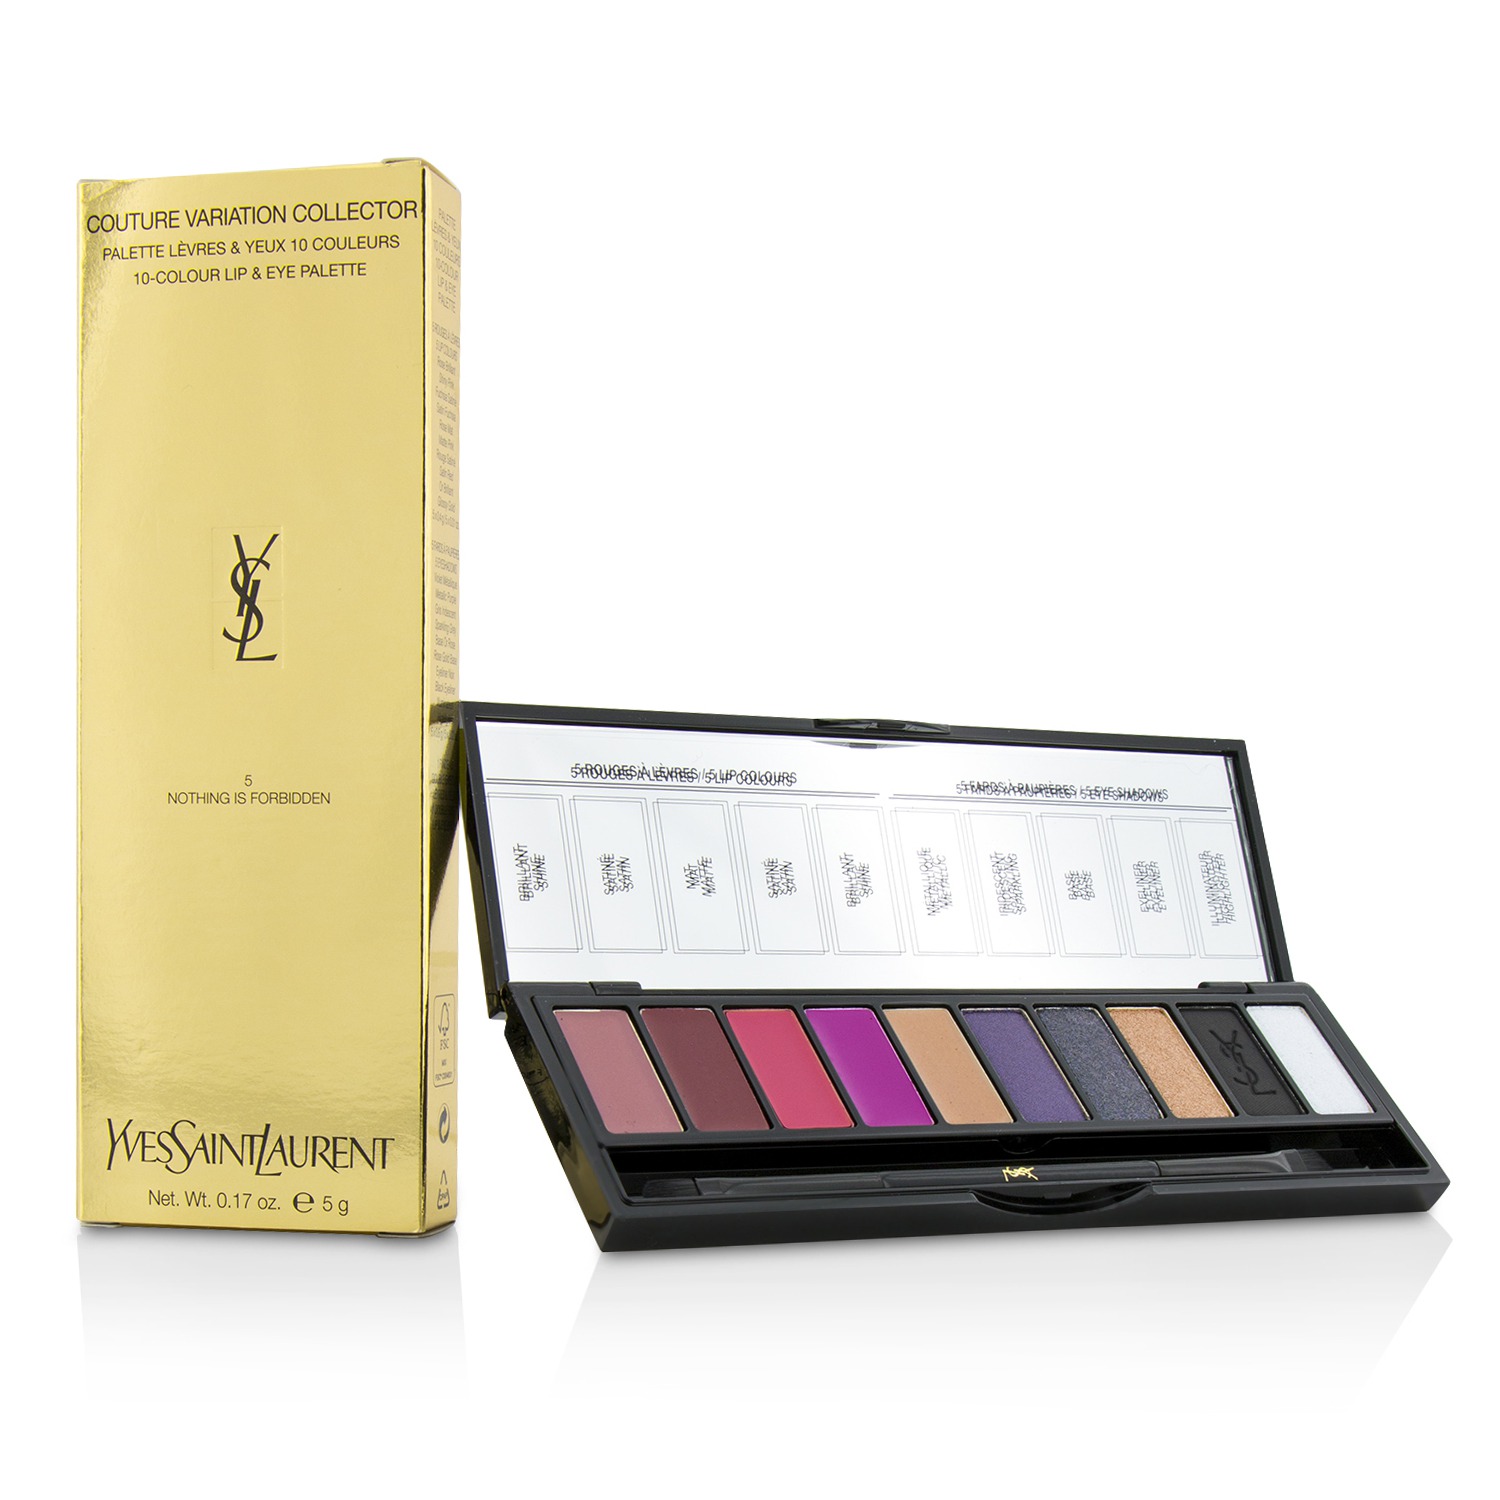 Couture Variation Collector 10 Colour Lip & Eye Palette - # 5 Nothing Is Forbidden Yves Saint Laurent Image